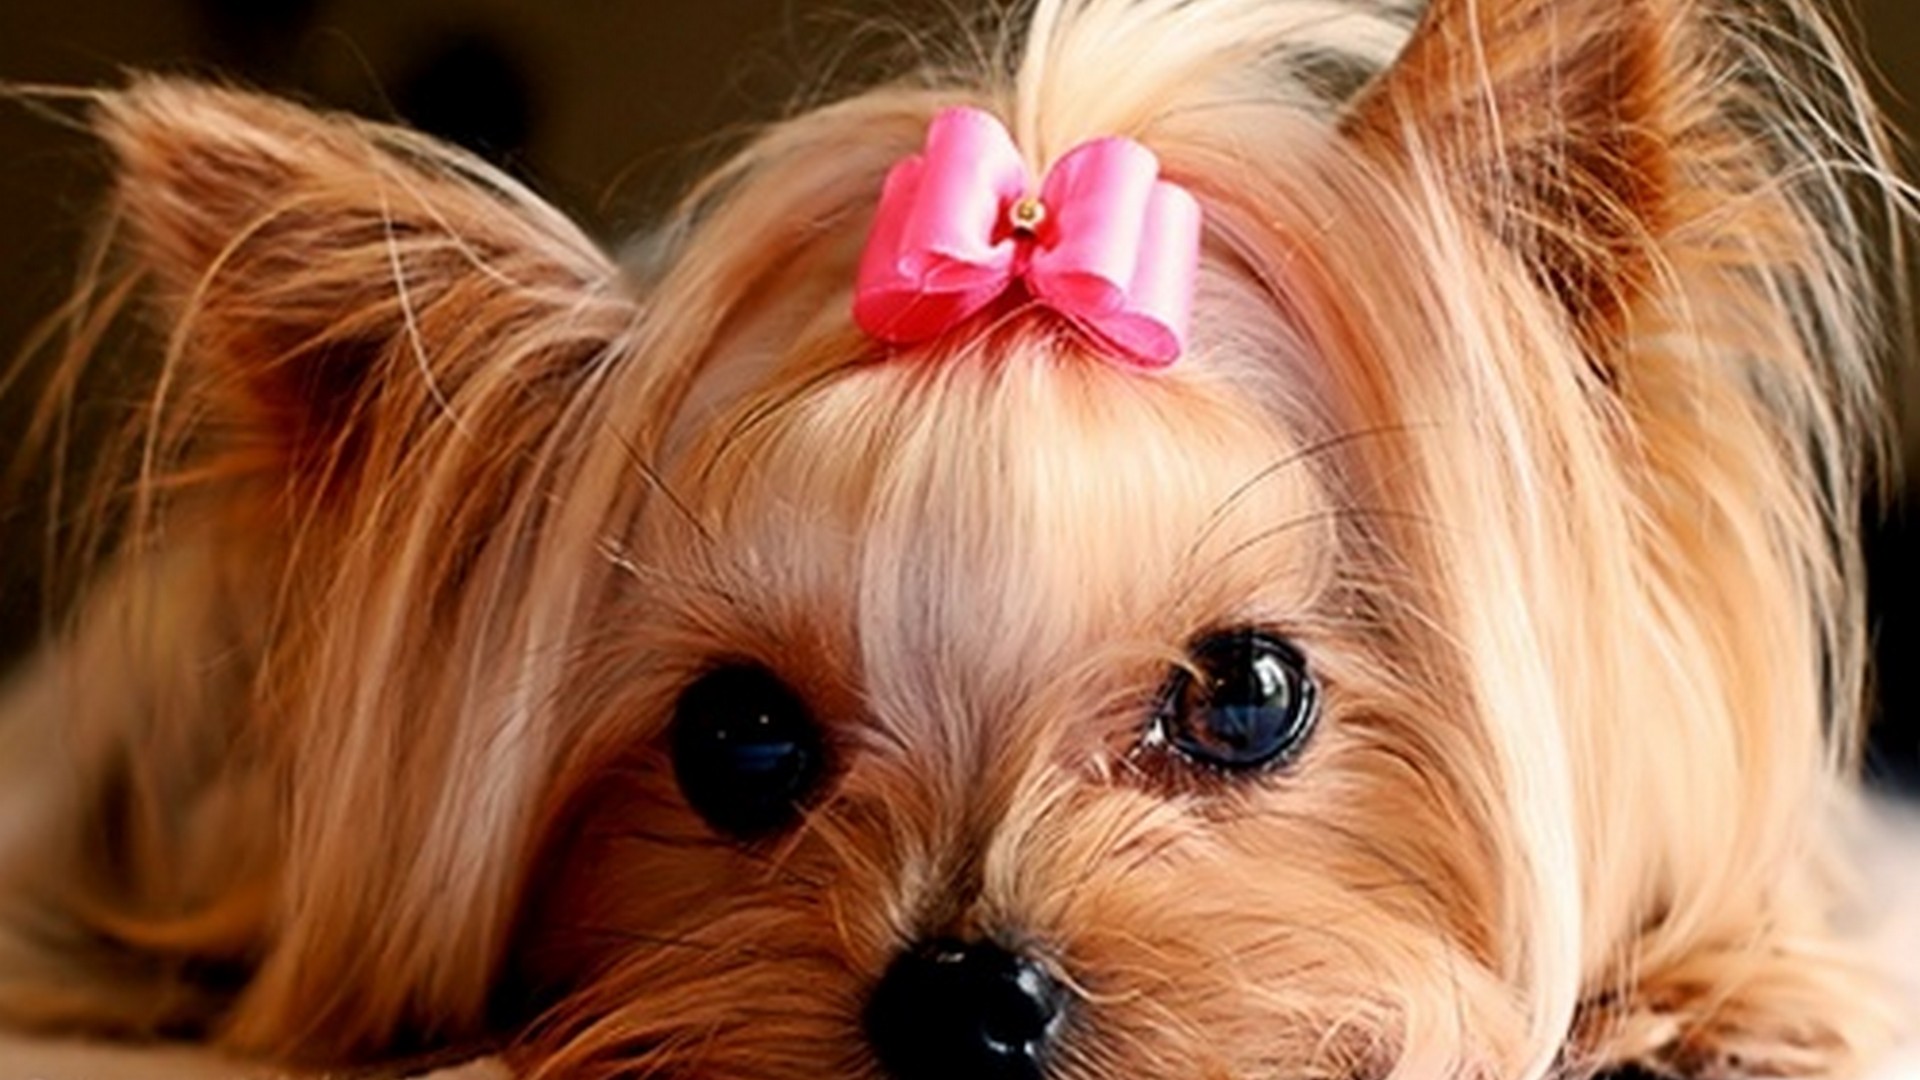 Wallpaper Cute Puppies Pictures 1920x1080